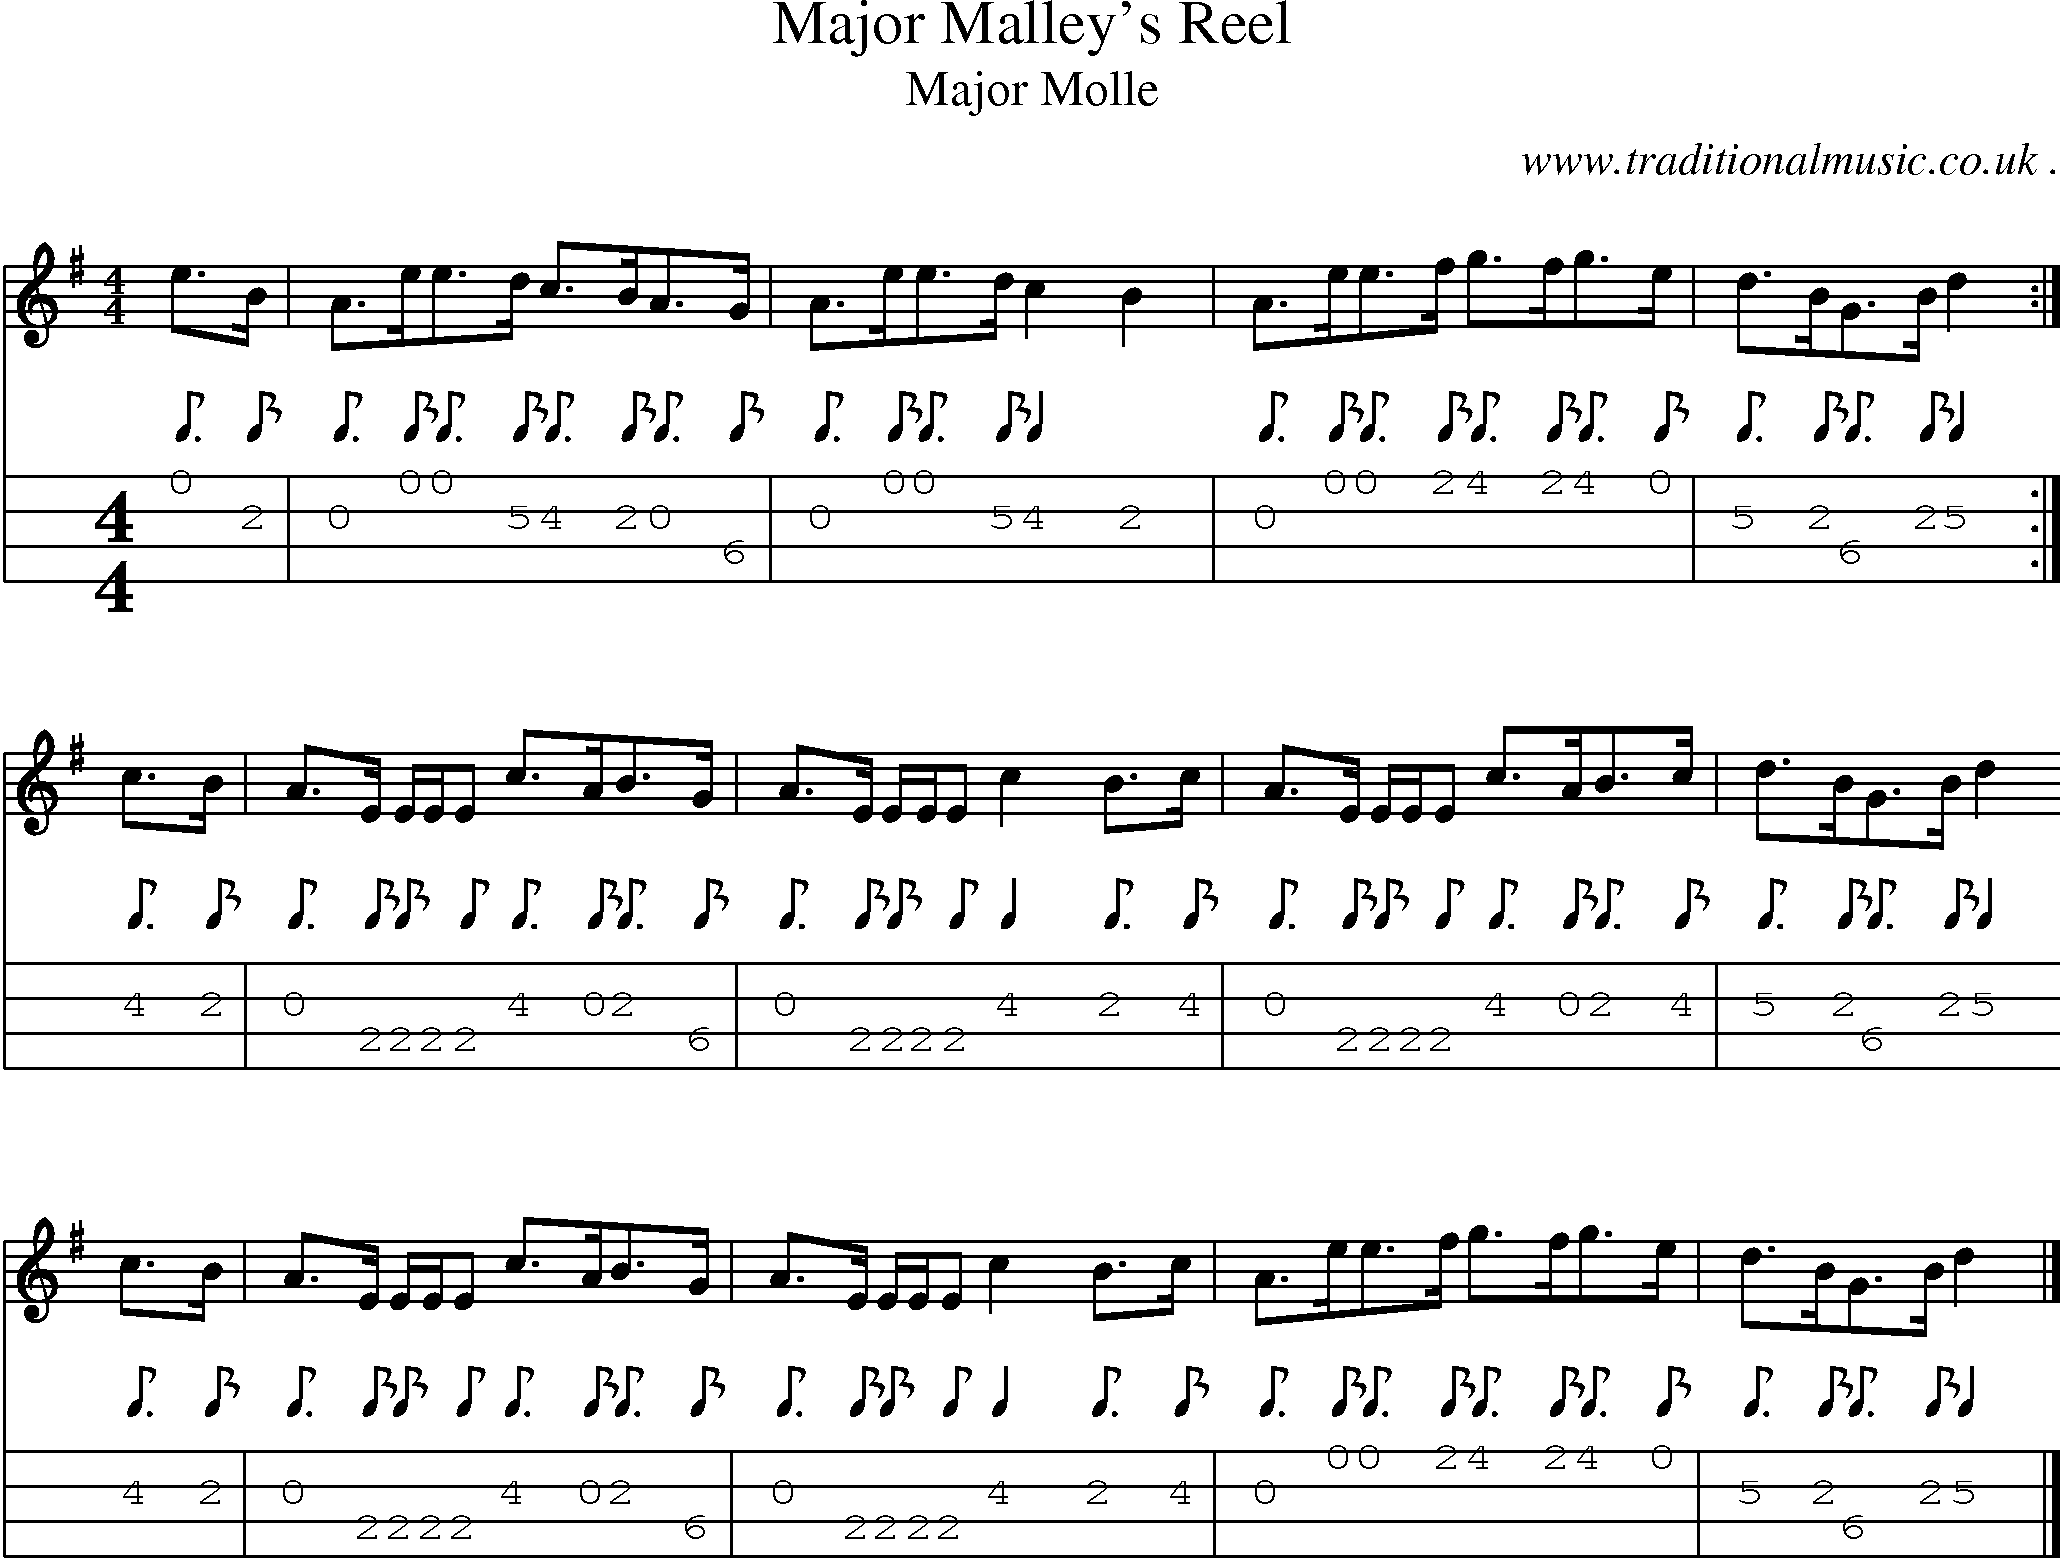 Sheet-music  score, Chords and Mandolin Tabs for Major Malleys Reel